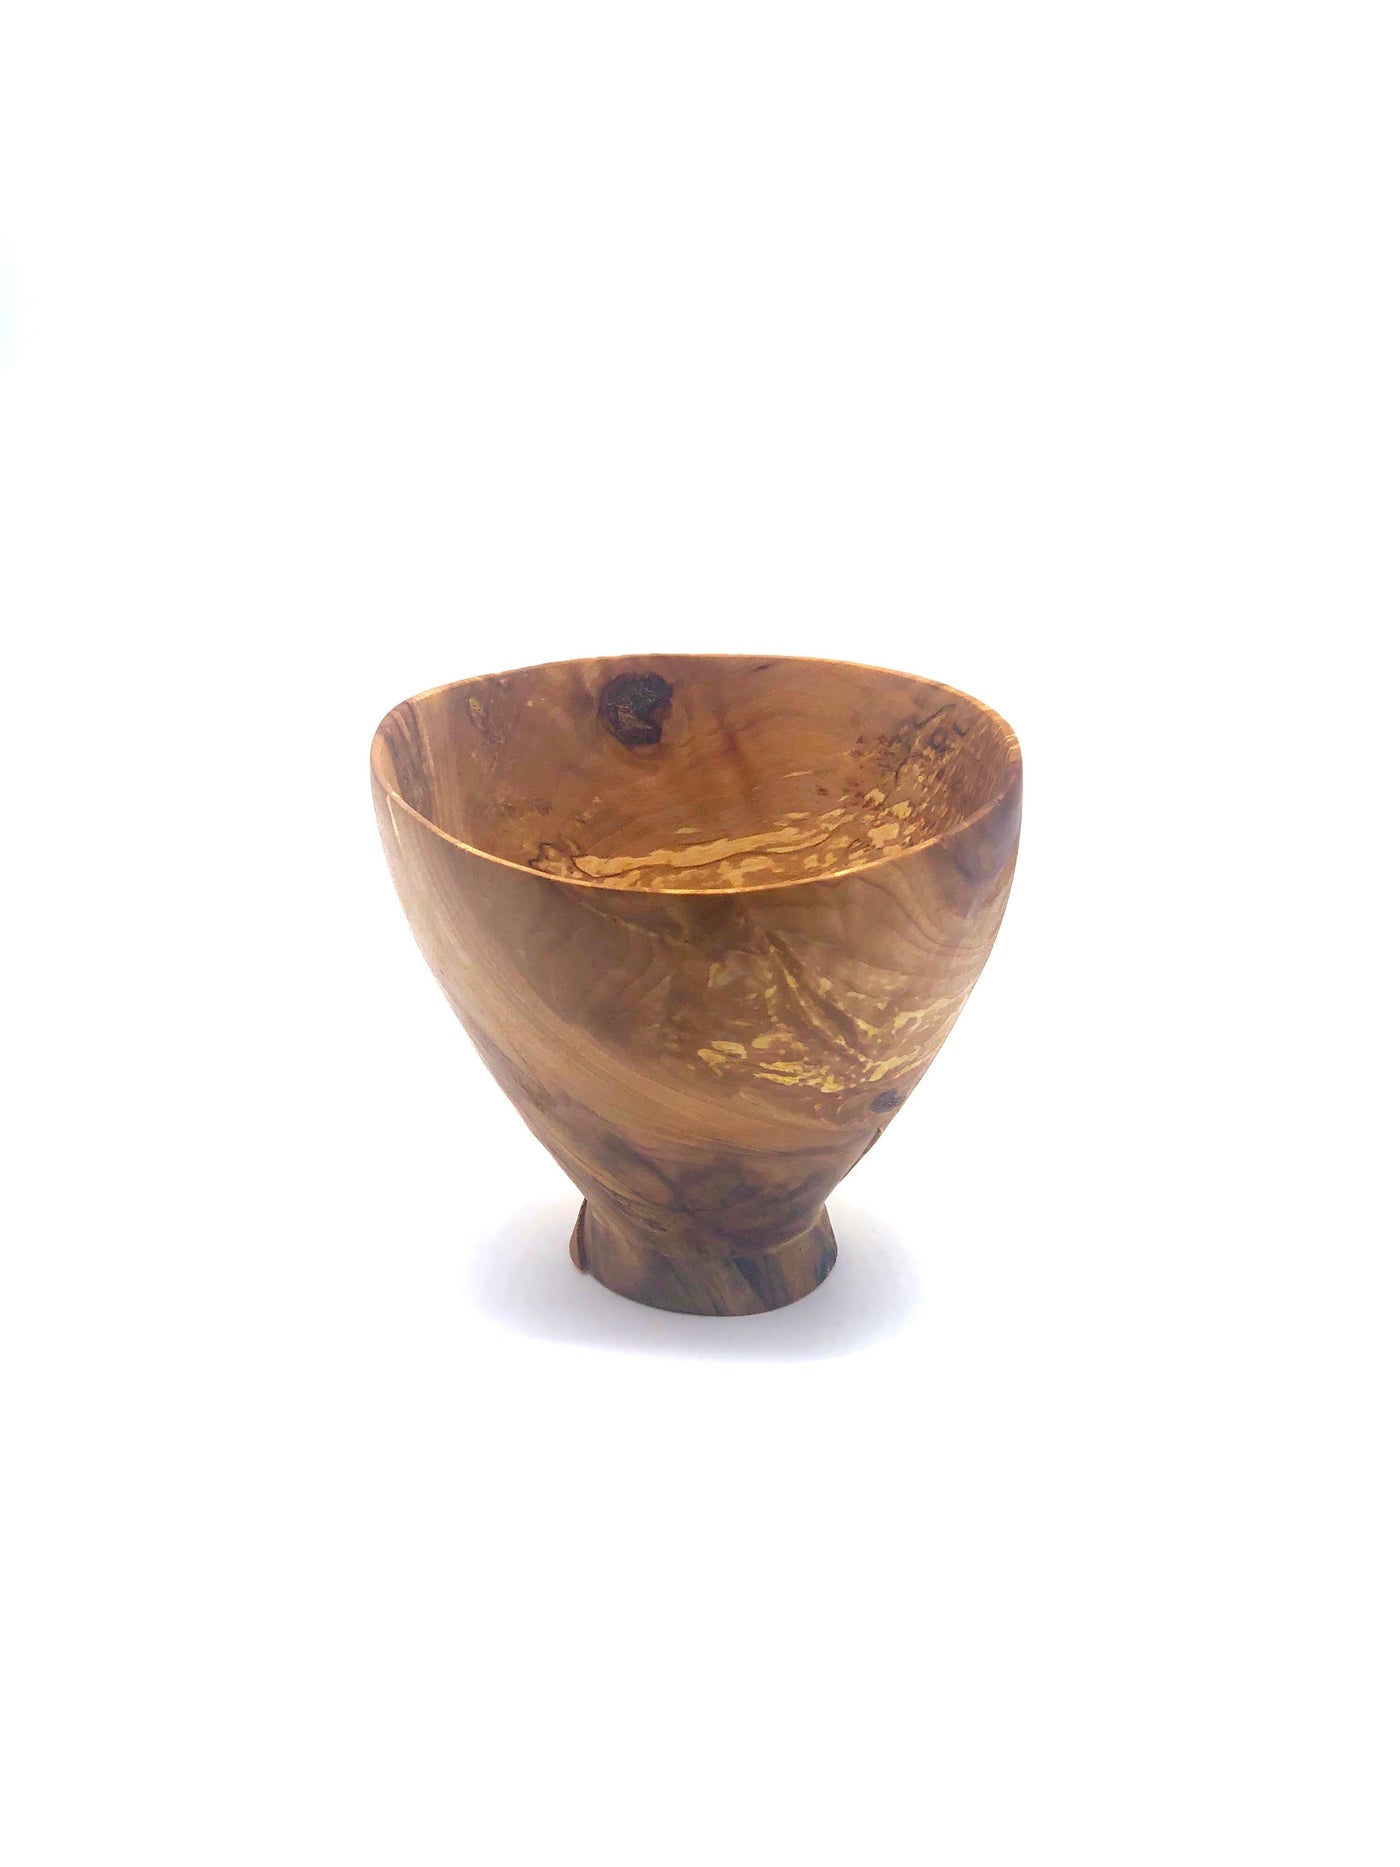 Small Handcrafted Wooden Bowl by Keegan Watson - Fruit of the Vine